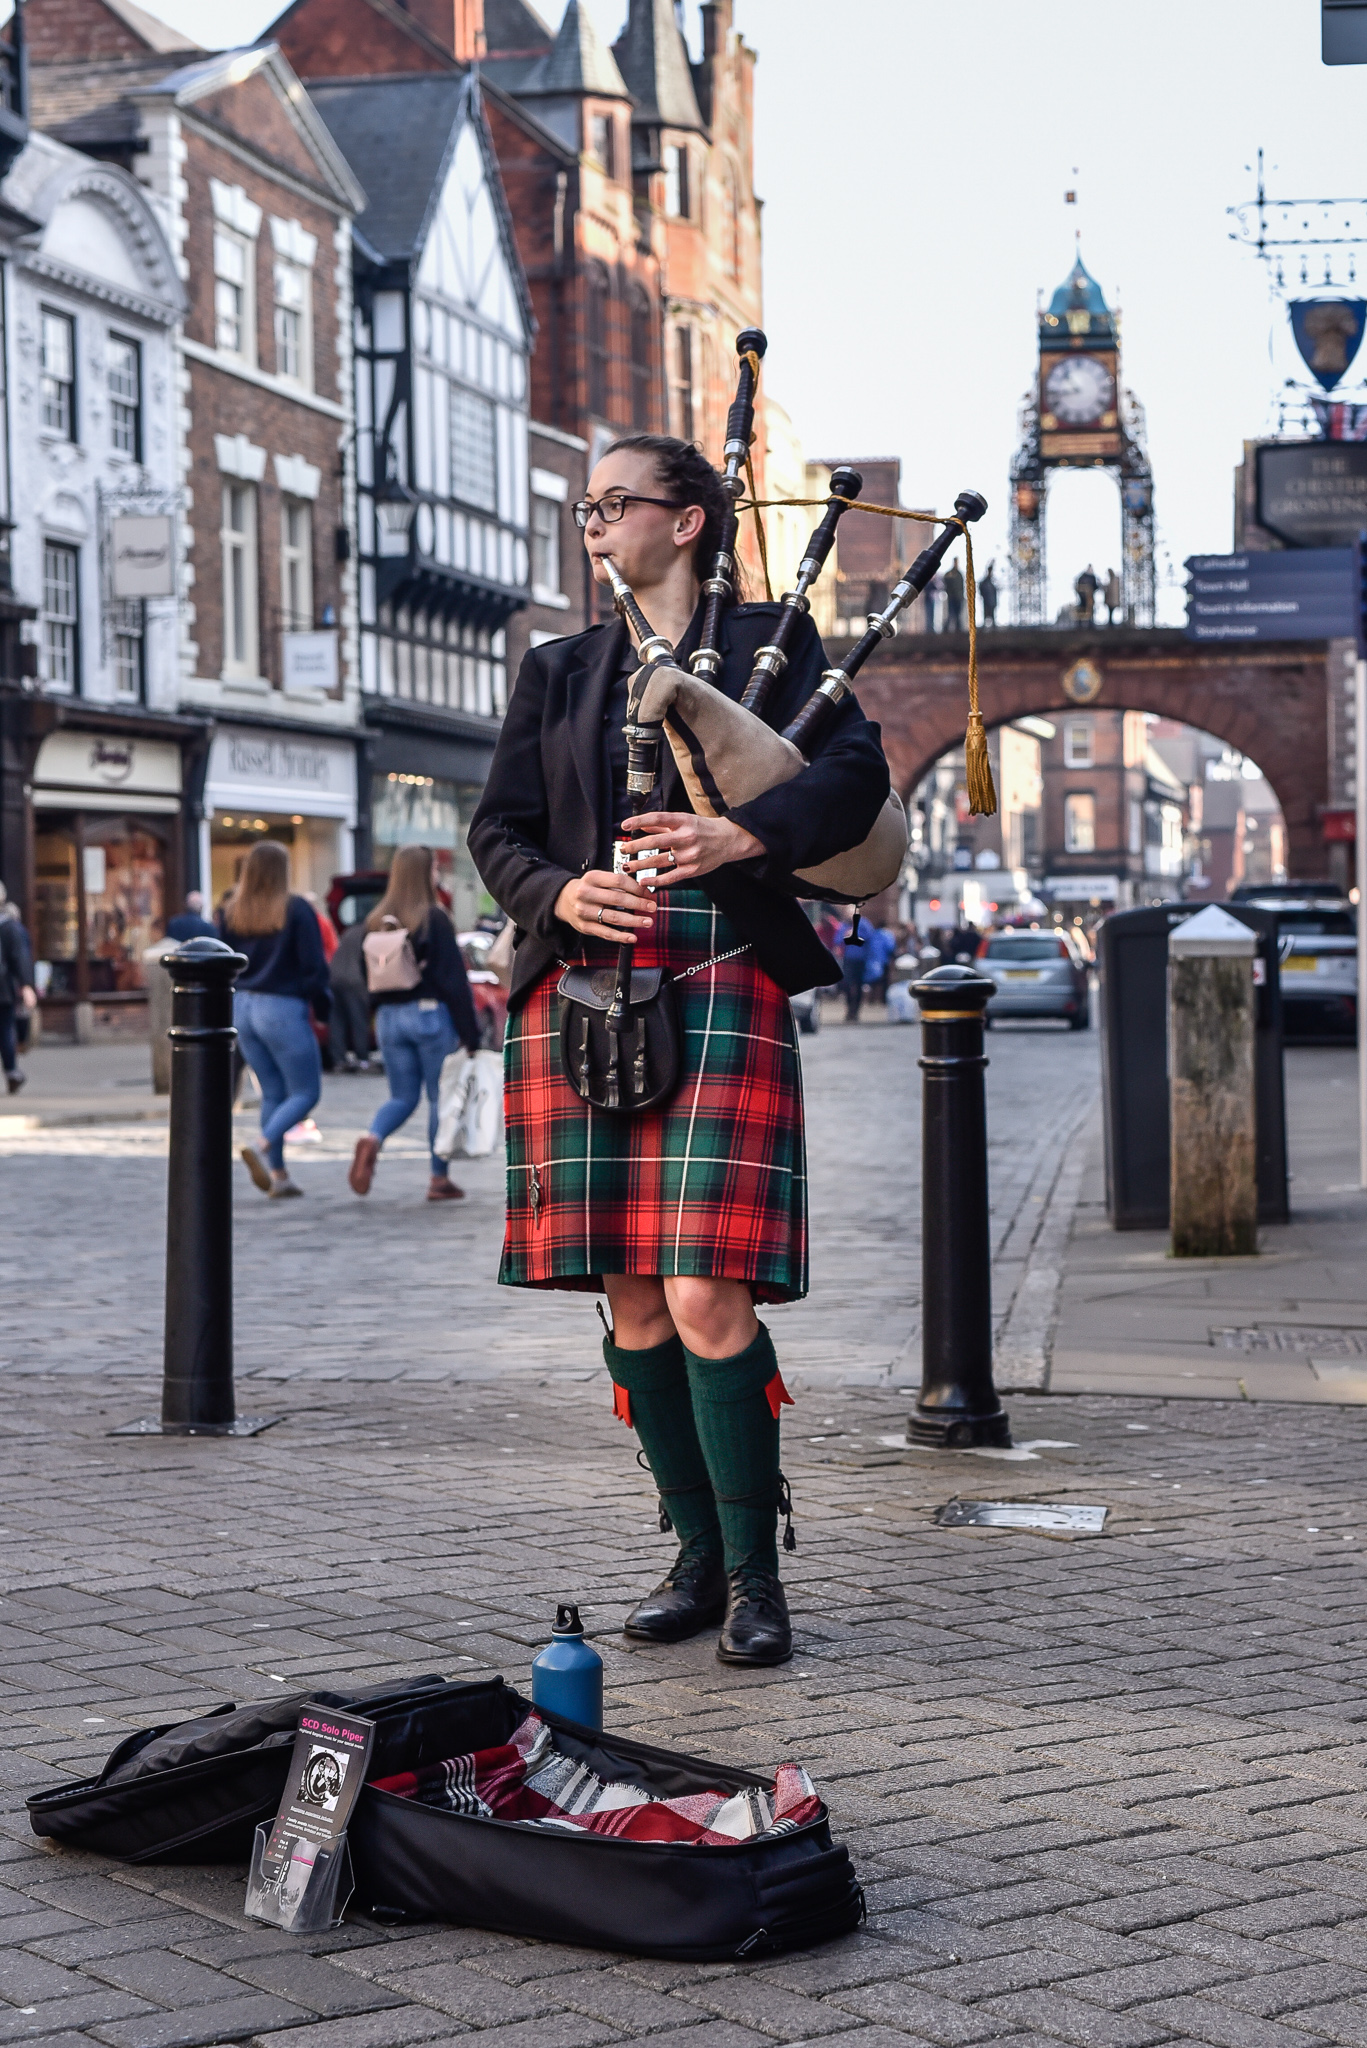 Chester Woman Playing Pipes